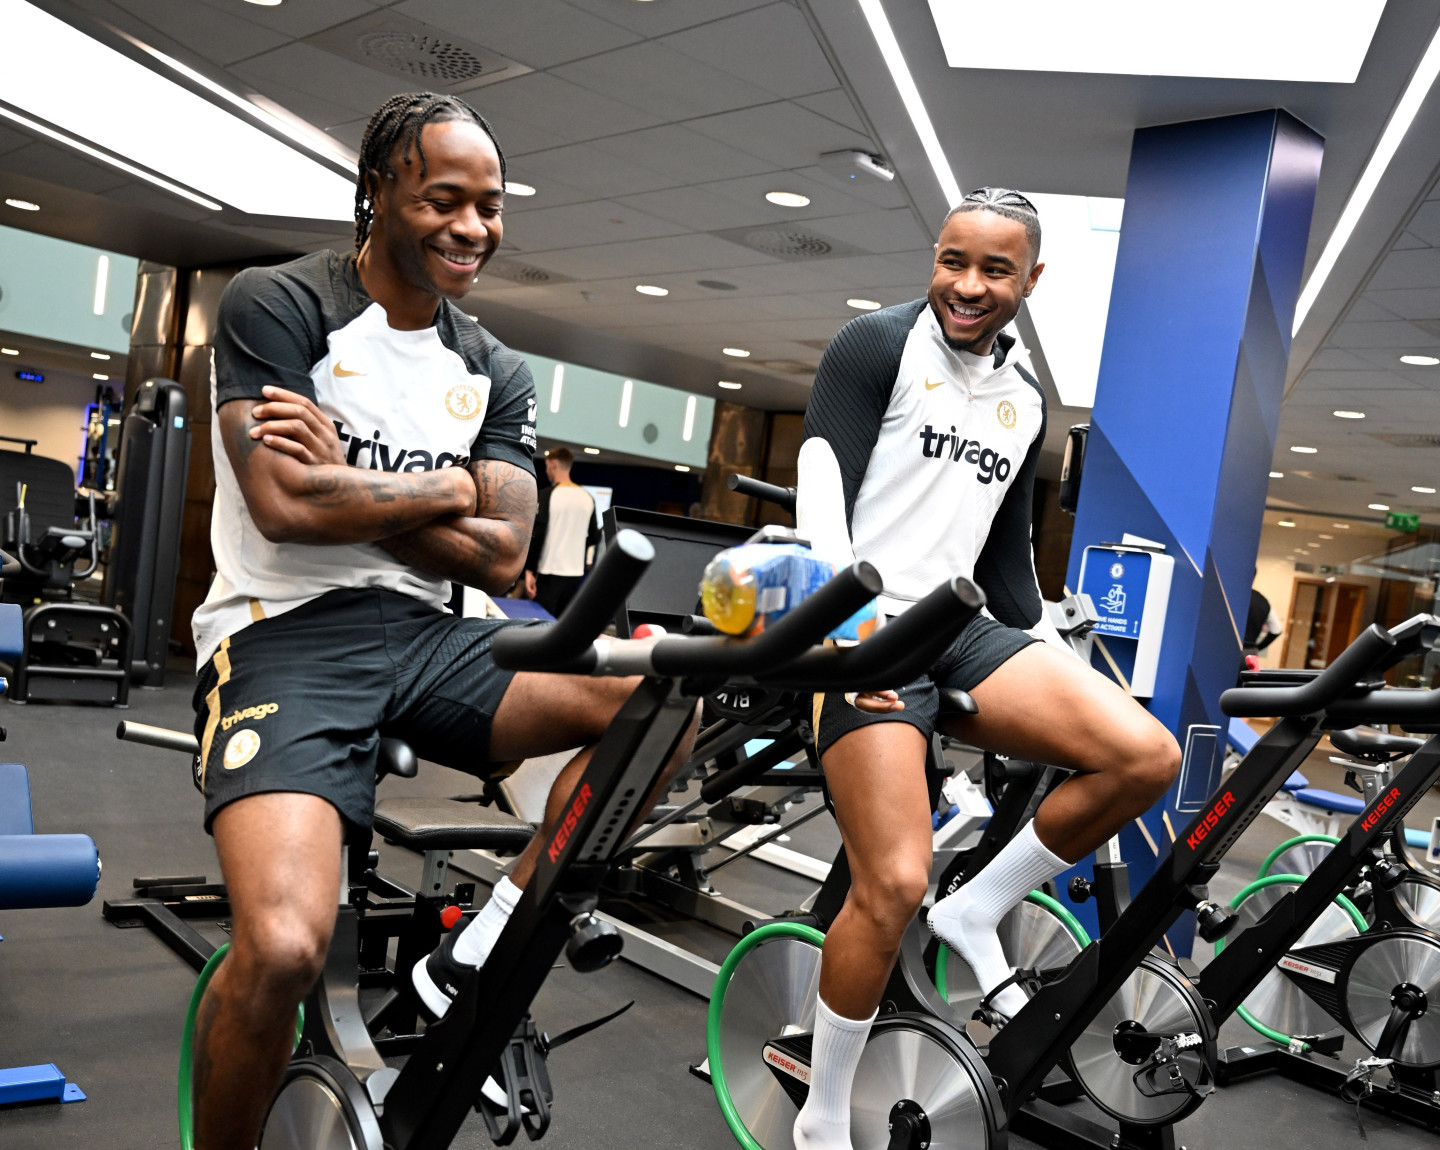 Five from training: Recovery in the gym, News